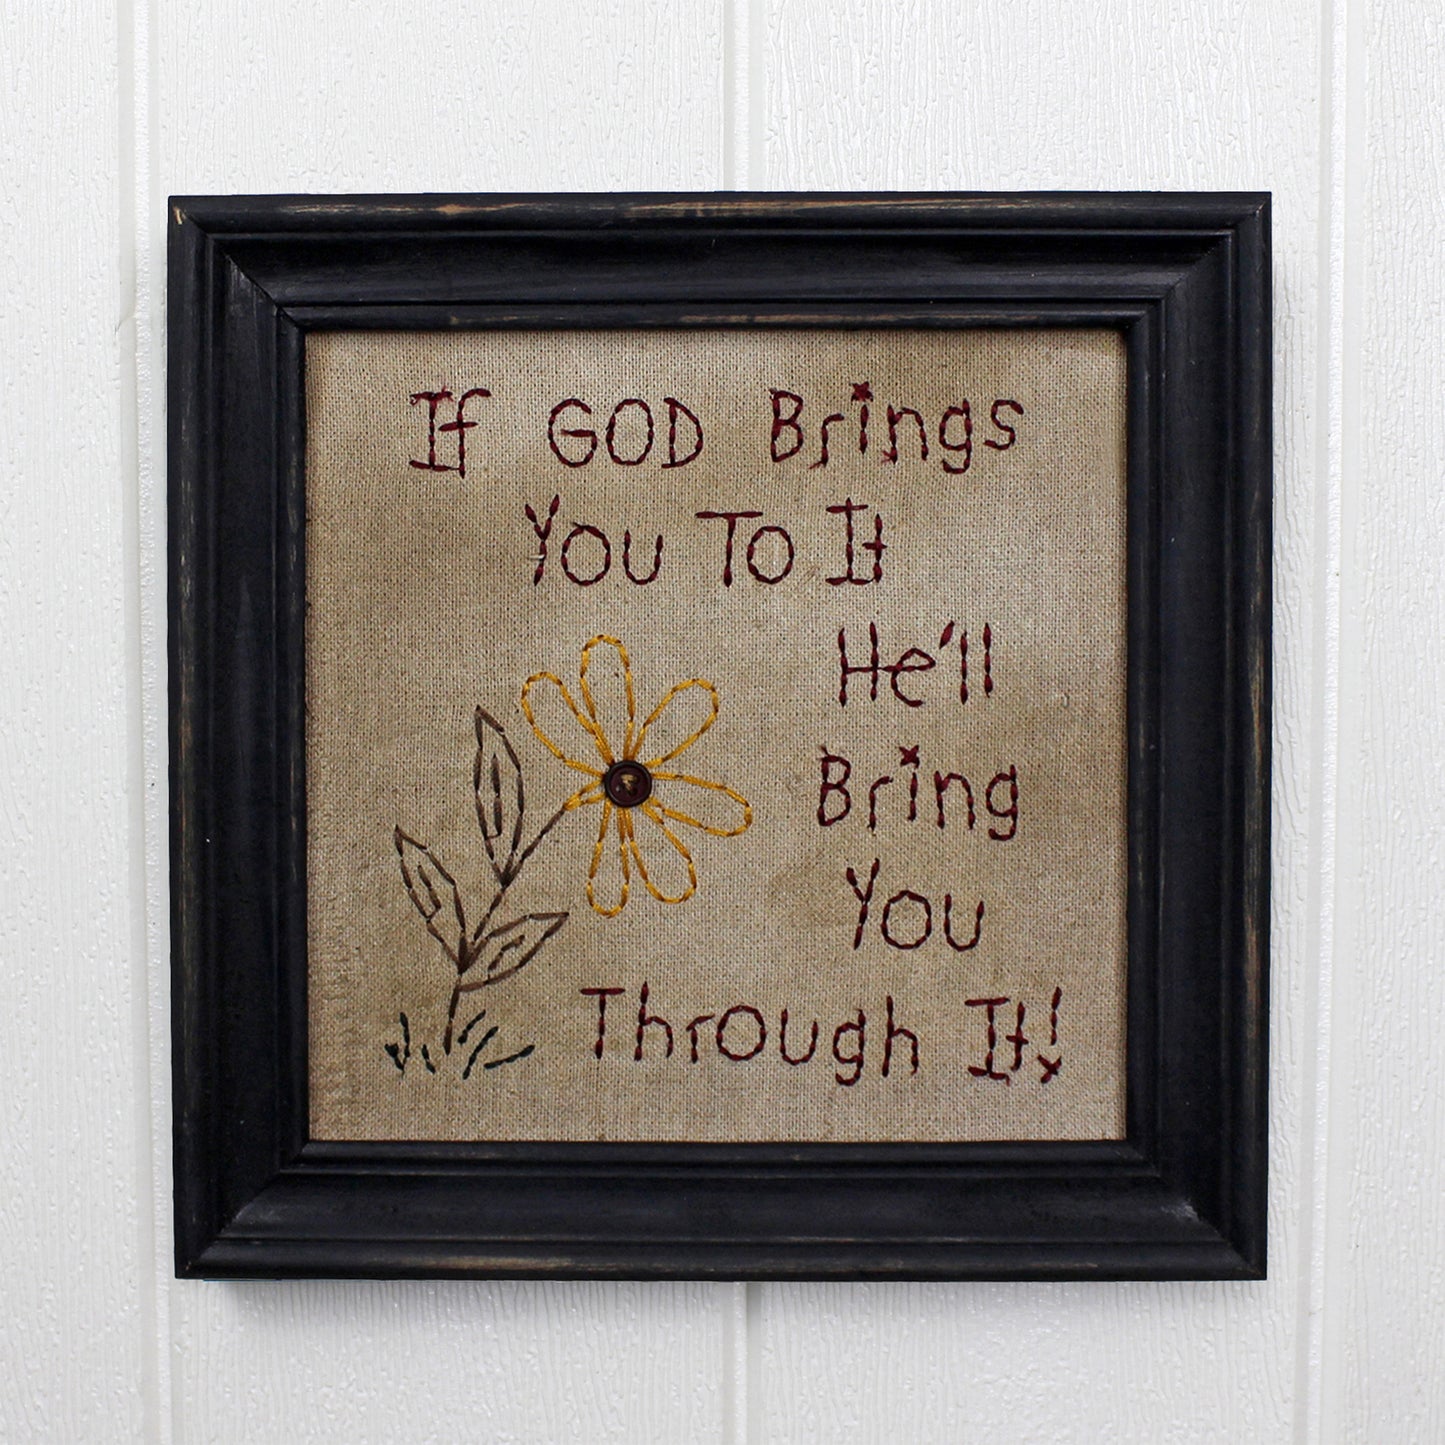 CVHOMEDECO. Primitives Antique If God Brings You to It, He 'll Bring You Through It Stitchery Frame Wall Mounted Hanging Decor Art, 8 x 8 Inch